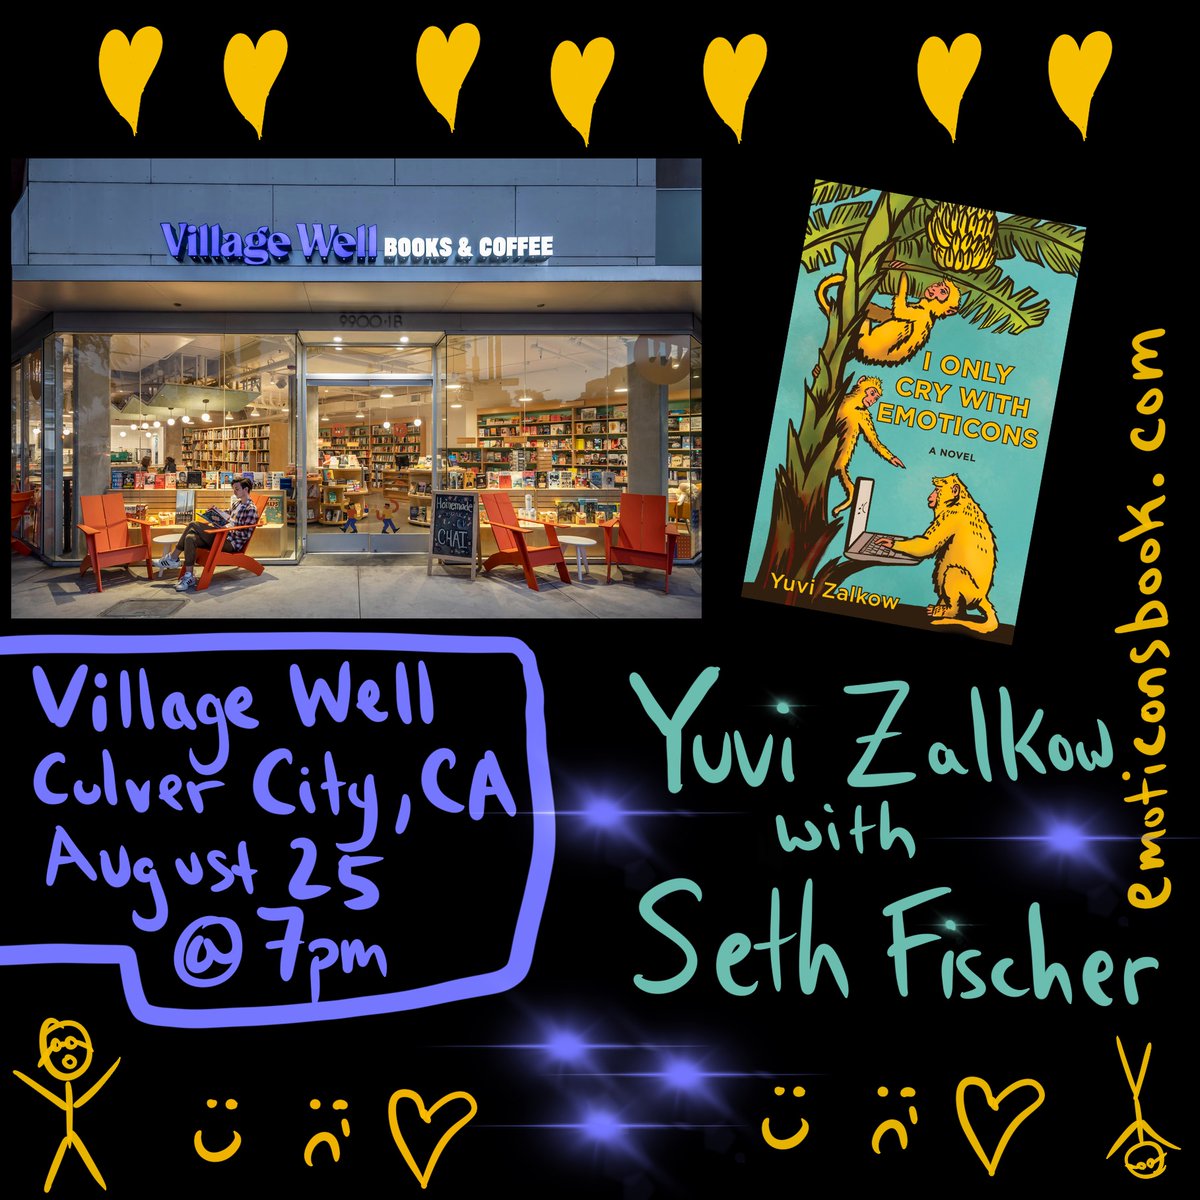 Looking for some literature and laughs? @YuviZalkow has both and will be sharing them with the crowd and guest @sethfischer at @villagewellcc TOMORROW at 7:00pm in Culver City! Get there early and catch the fun!